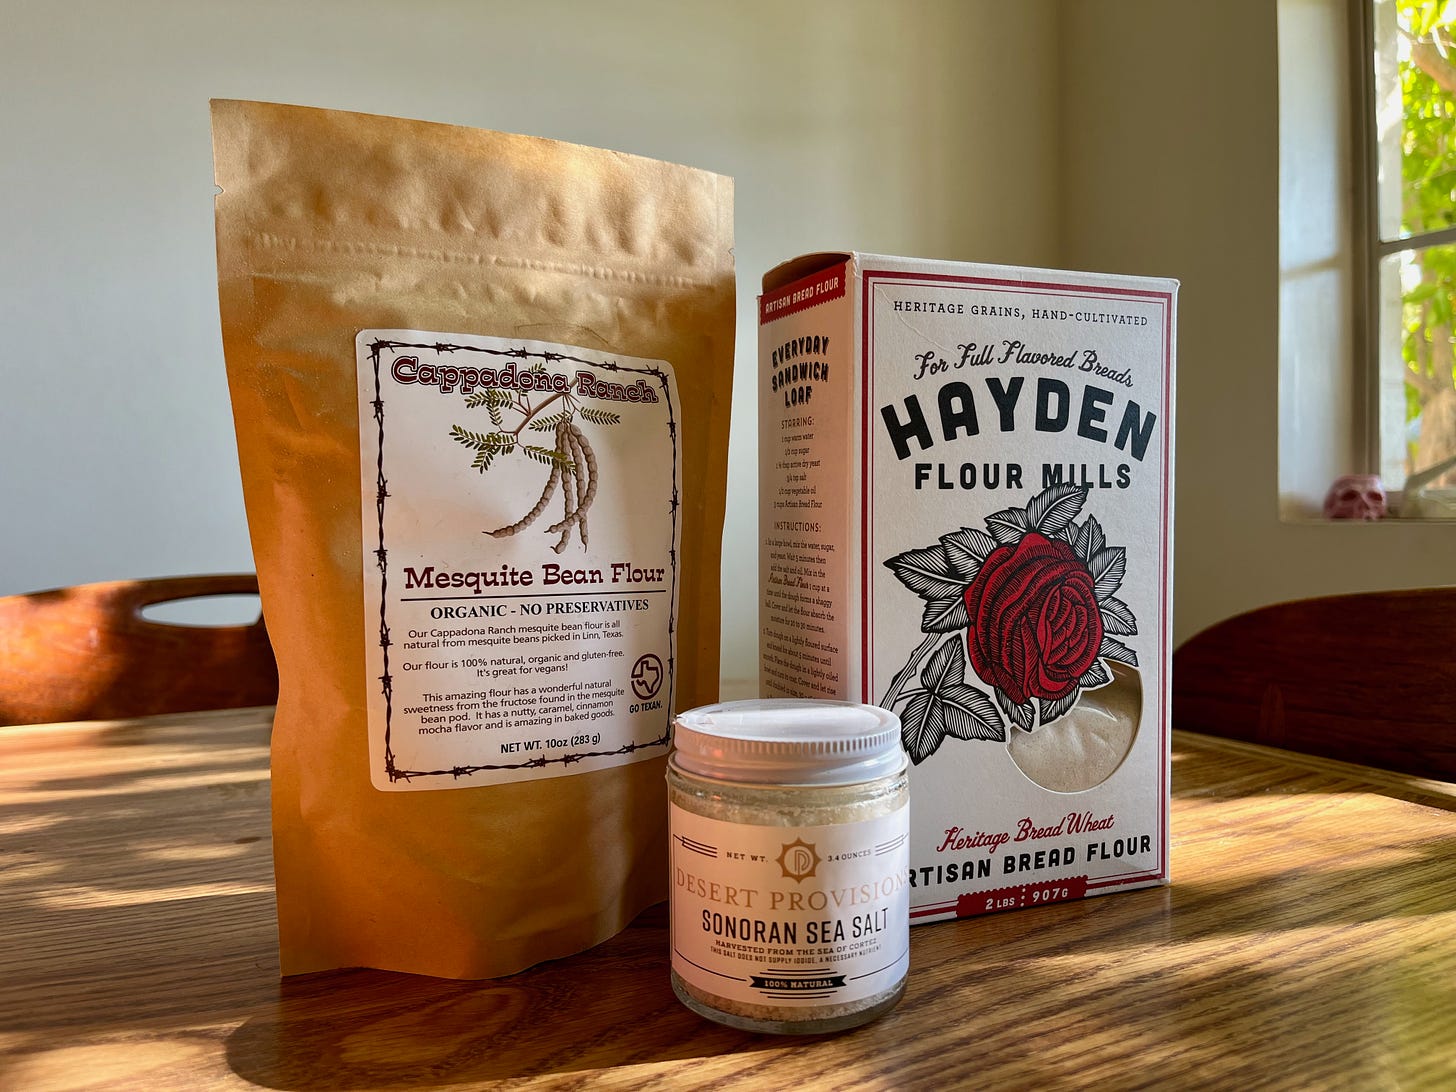 Locally grown and milled Red Fife whole grain flour from Hayden Flour Mills. Sonoran Sea Salt from Desert Provisions, which is based in Tucson. And Mesquite Bean Flour from Cappadona Ranch in Linn, TX